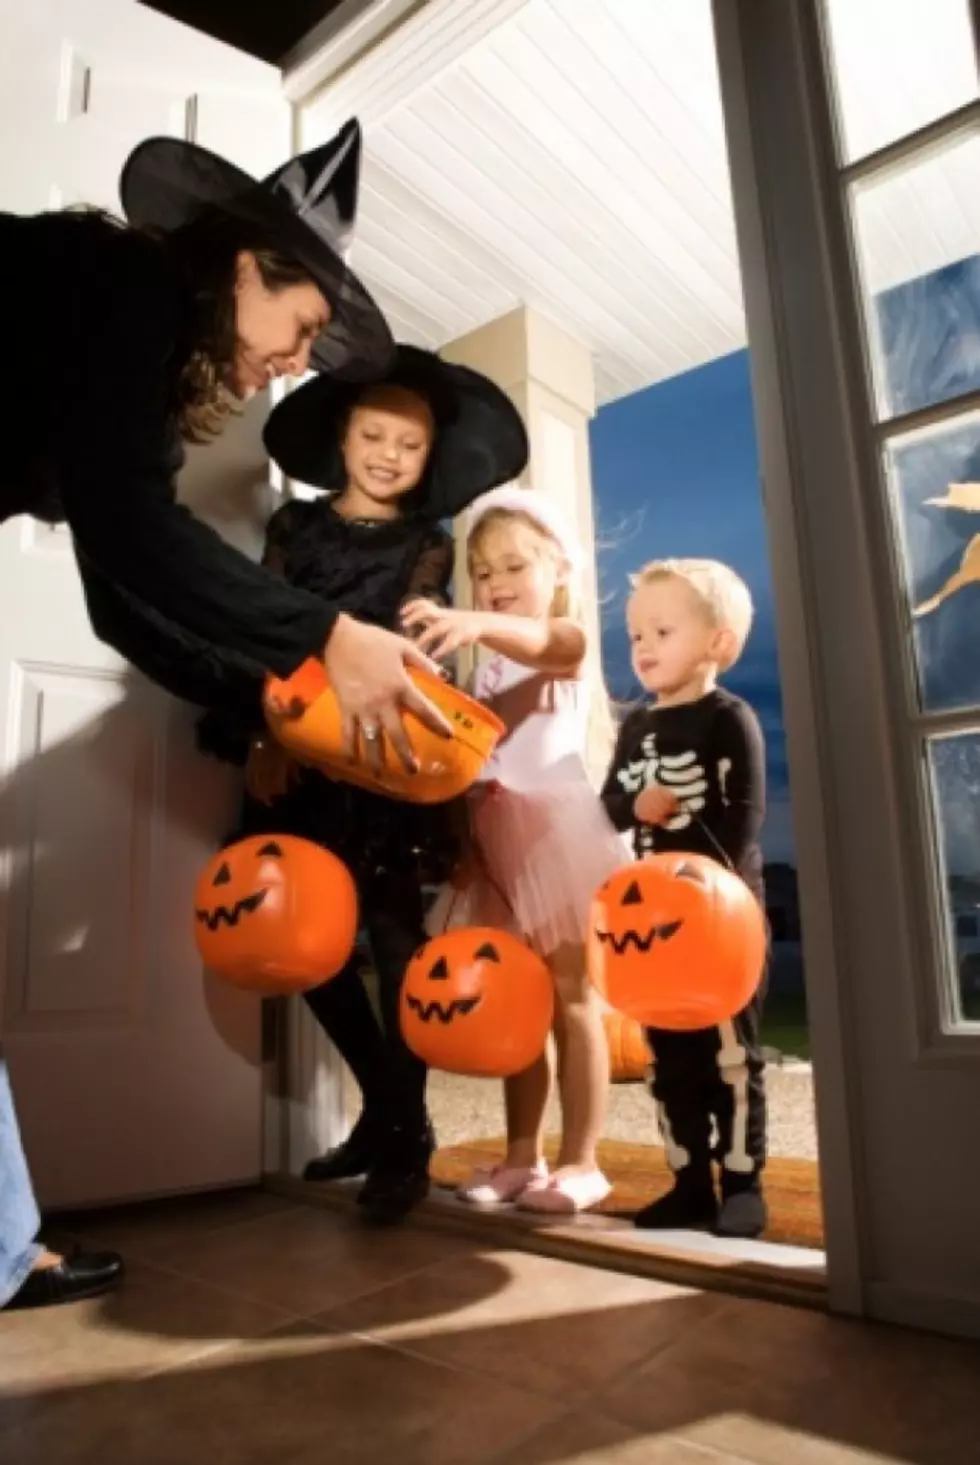 How to Keep Kids Safe During Halloween